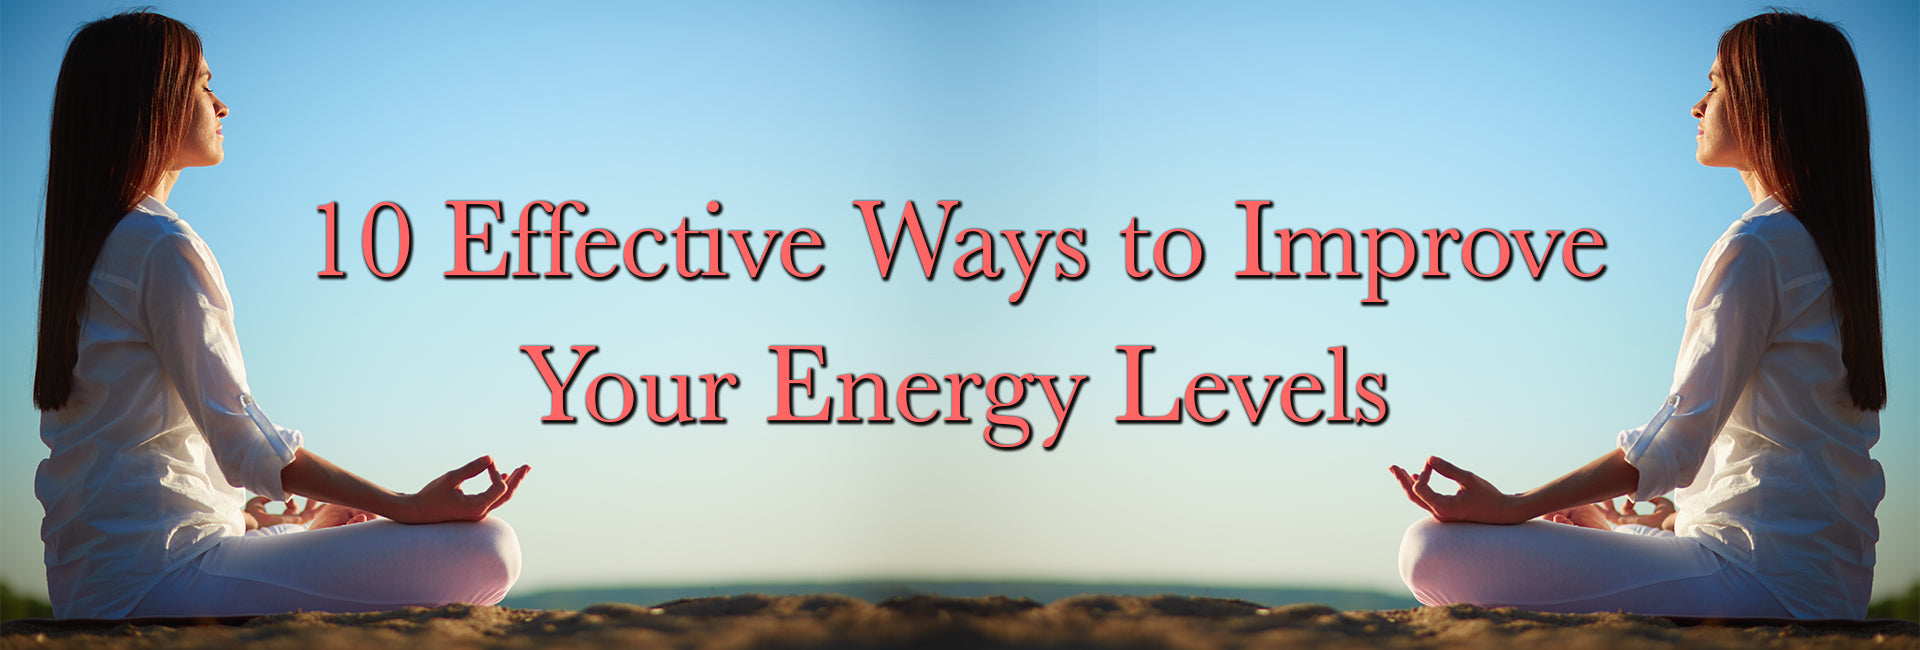 energy levels, boost energy, improve your sleep, boost mood and energy levels, 10 Easy Ways to Increase Energy Levels, Improve your energy levels, Exercise Regularly